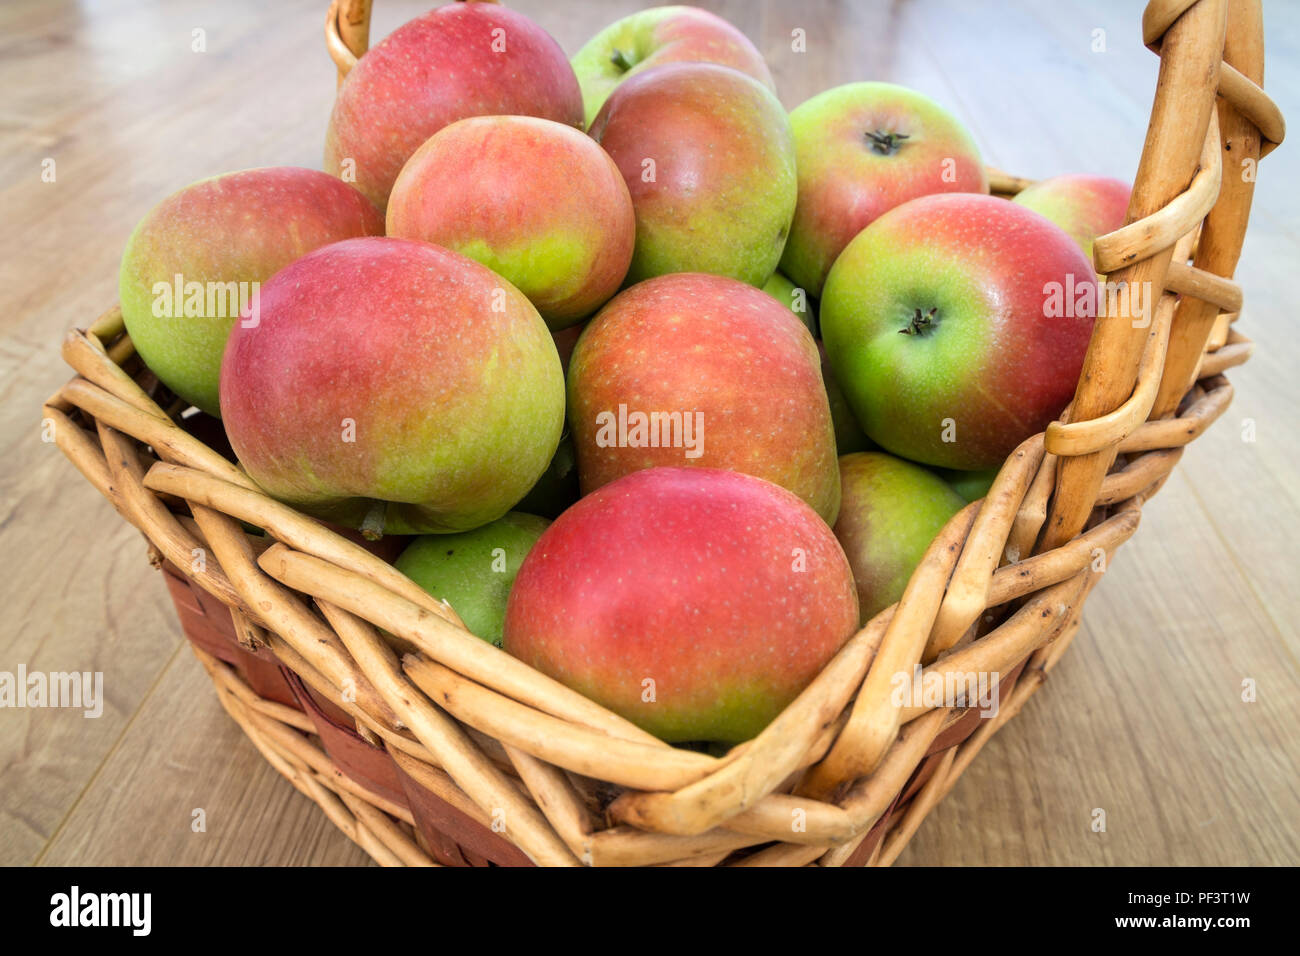 A Freshly Picked Basket of Discovery (Malus domestica) Apples. Stock Photo